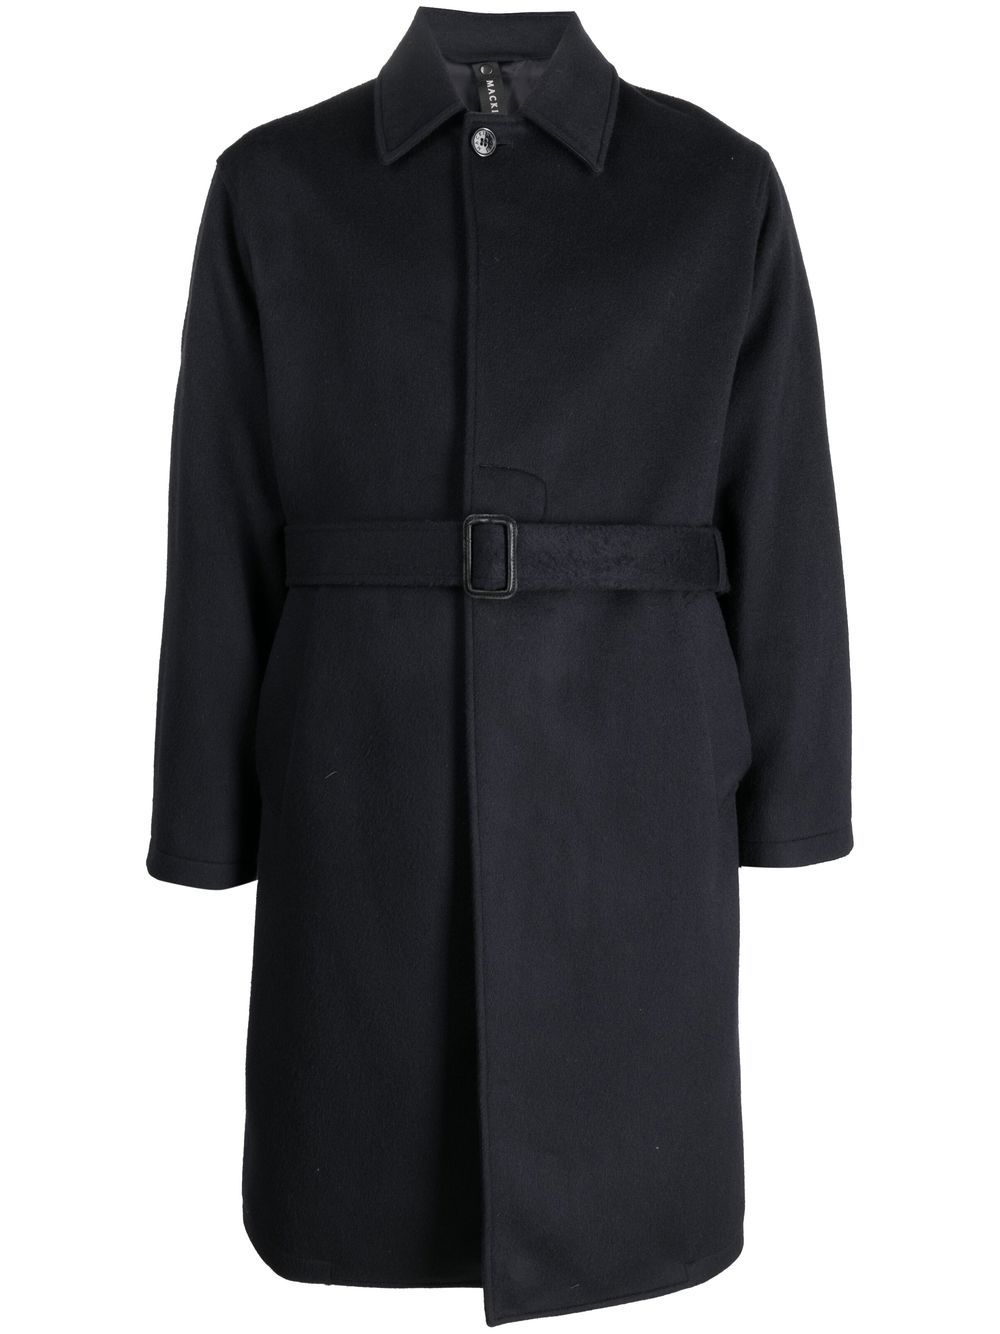 Mackintosh belted wool-cashmere blend trench coat - WARDROB